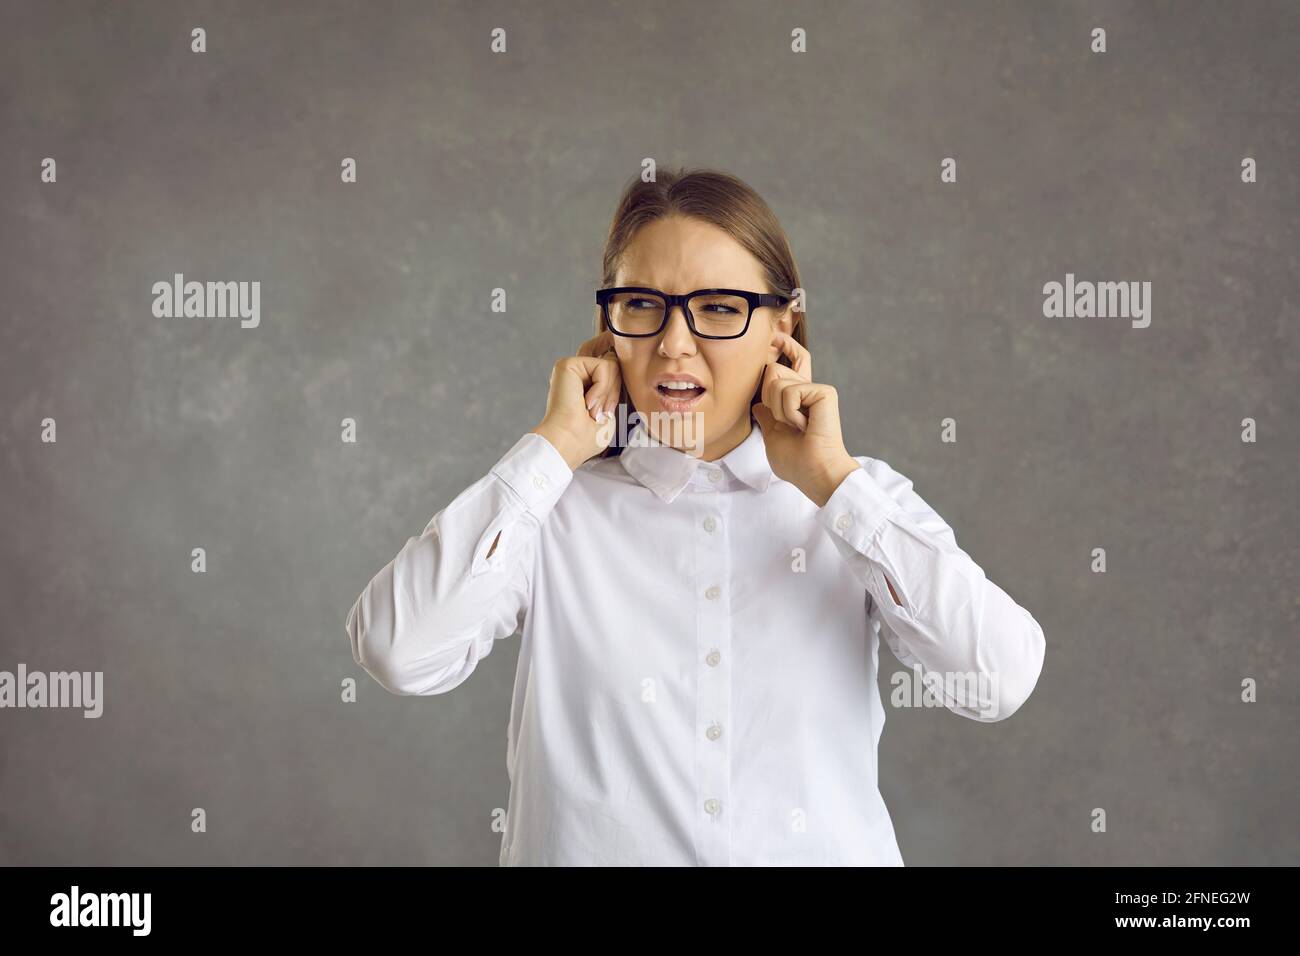 Woman who is irritated by a loud noise closes her ears, not wanting to hear anything. Stock Photo